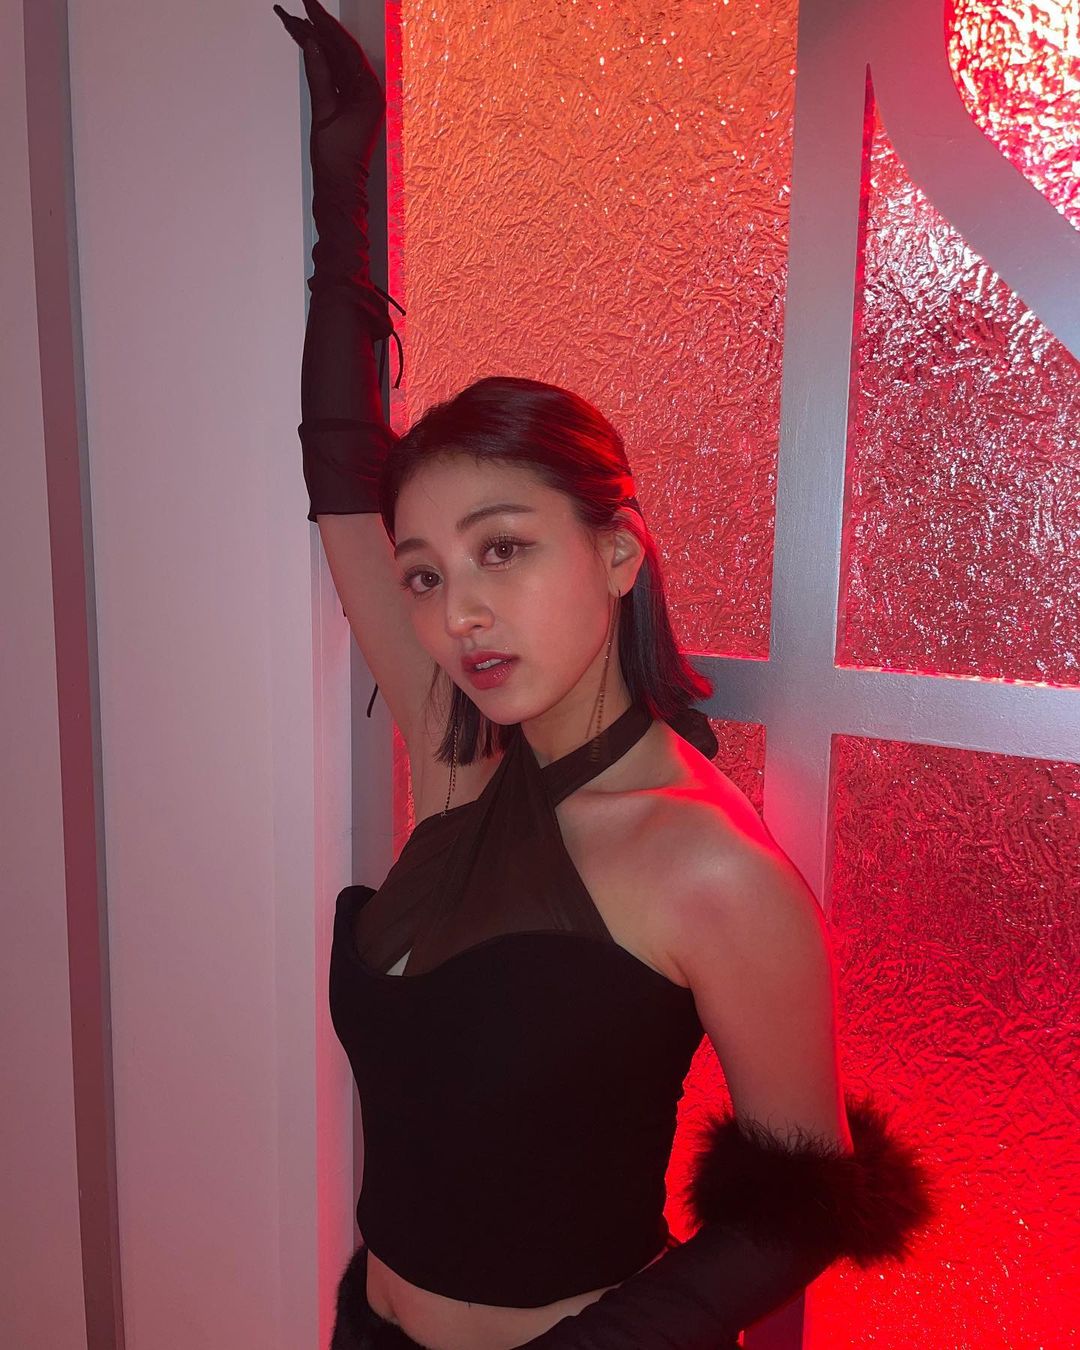 TWICE Jihyo, innocent and sexy all at once... 'Inverted attraction'